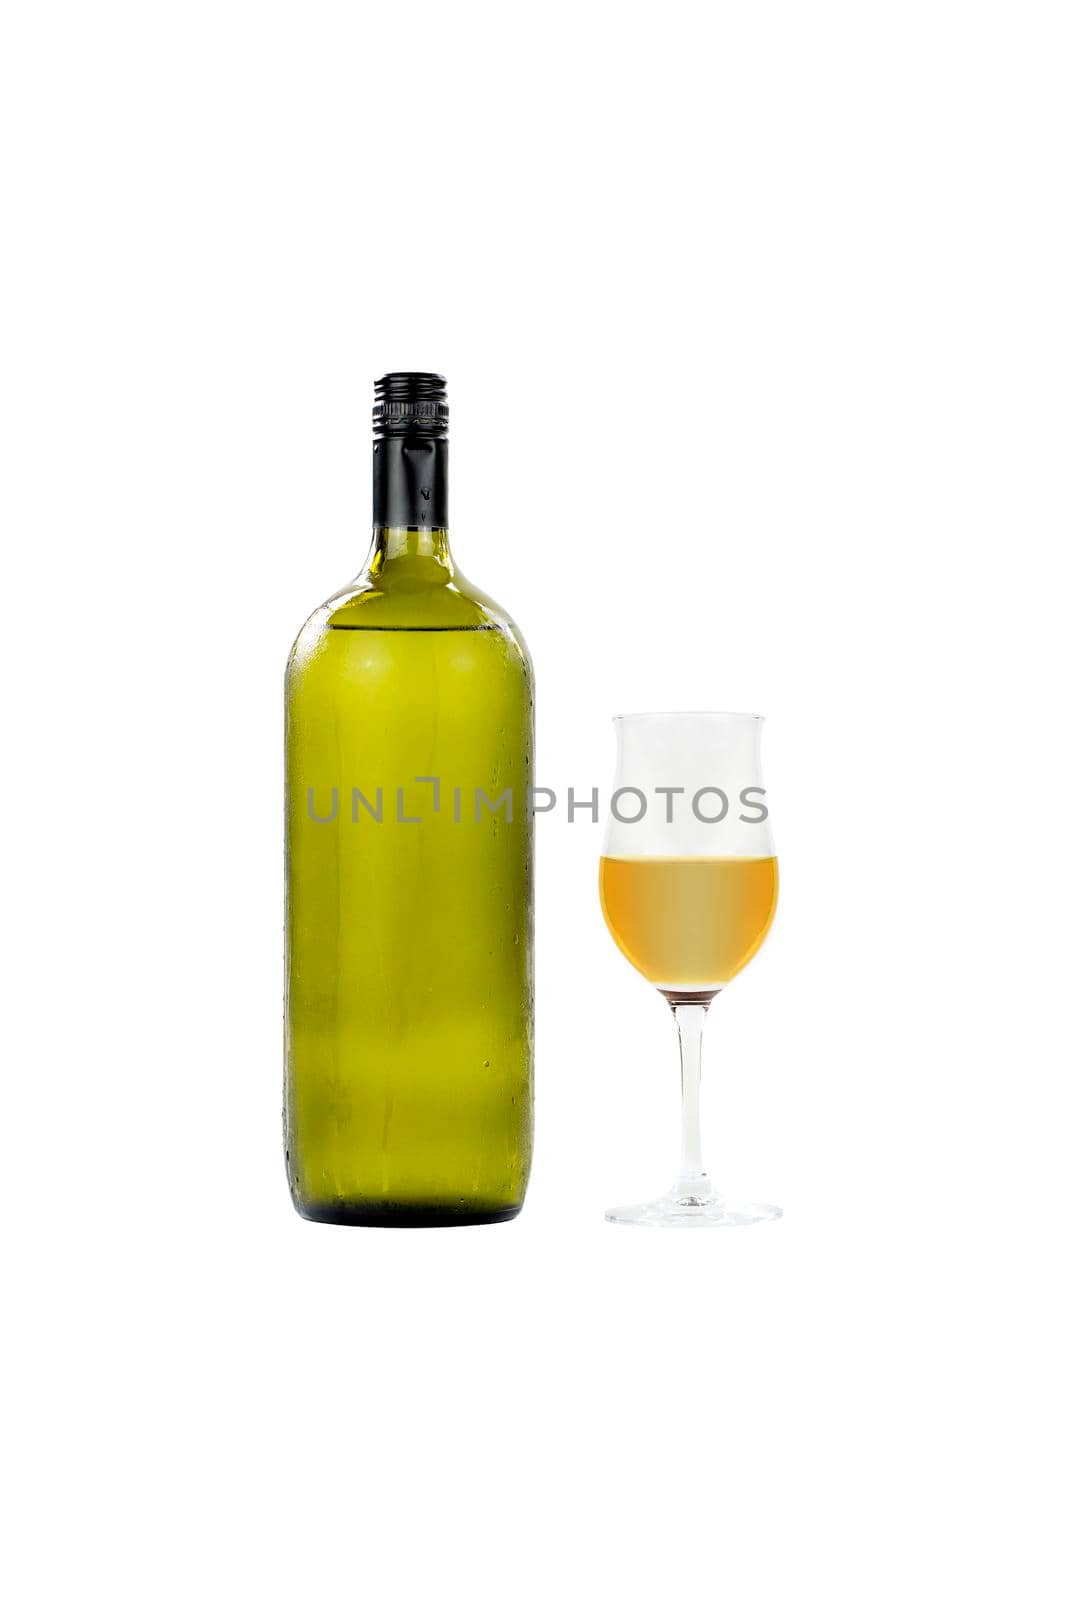 Large glass wine bottle and wine glass isolated on white background.